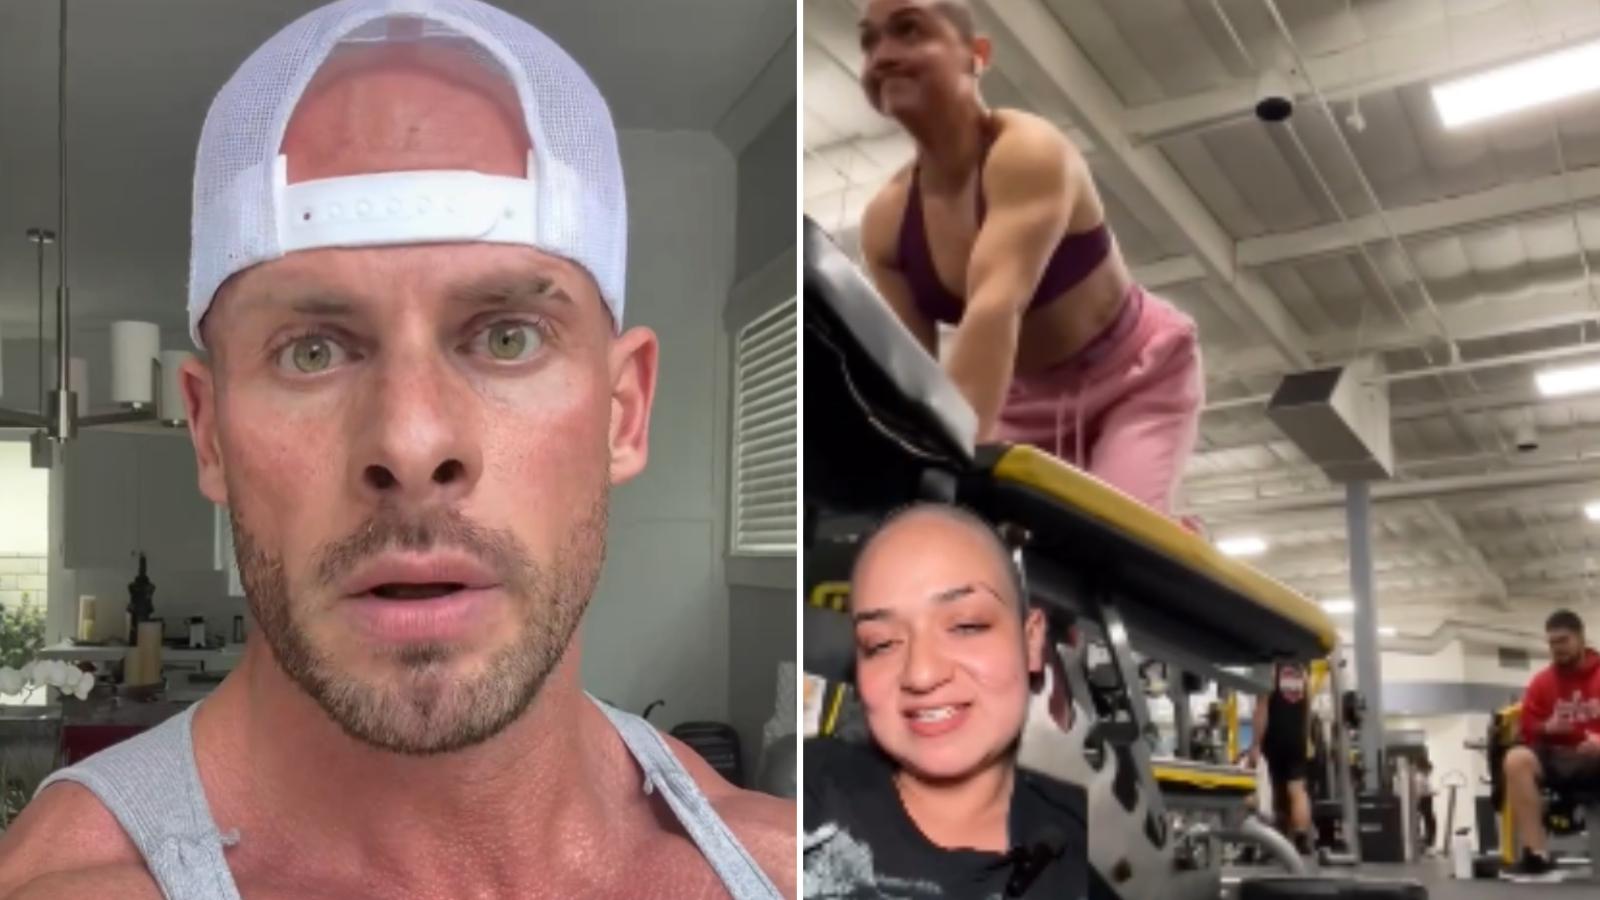 joey swoll calls out woman at gym